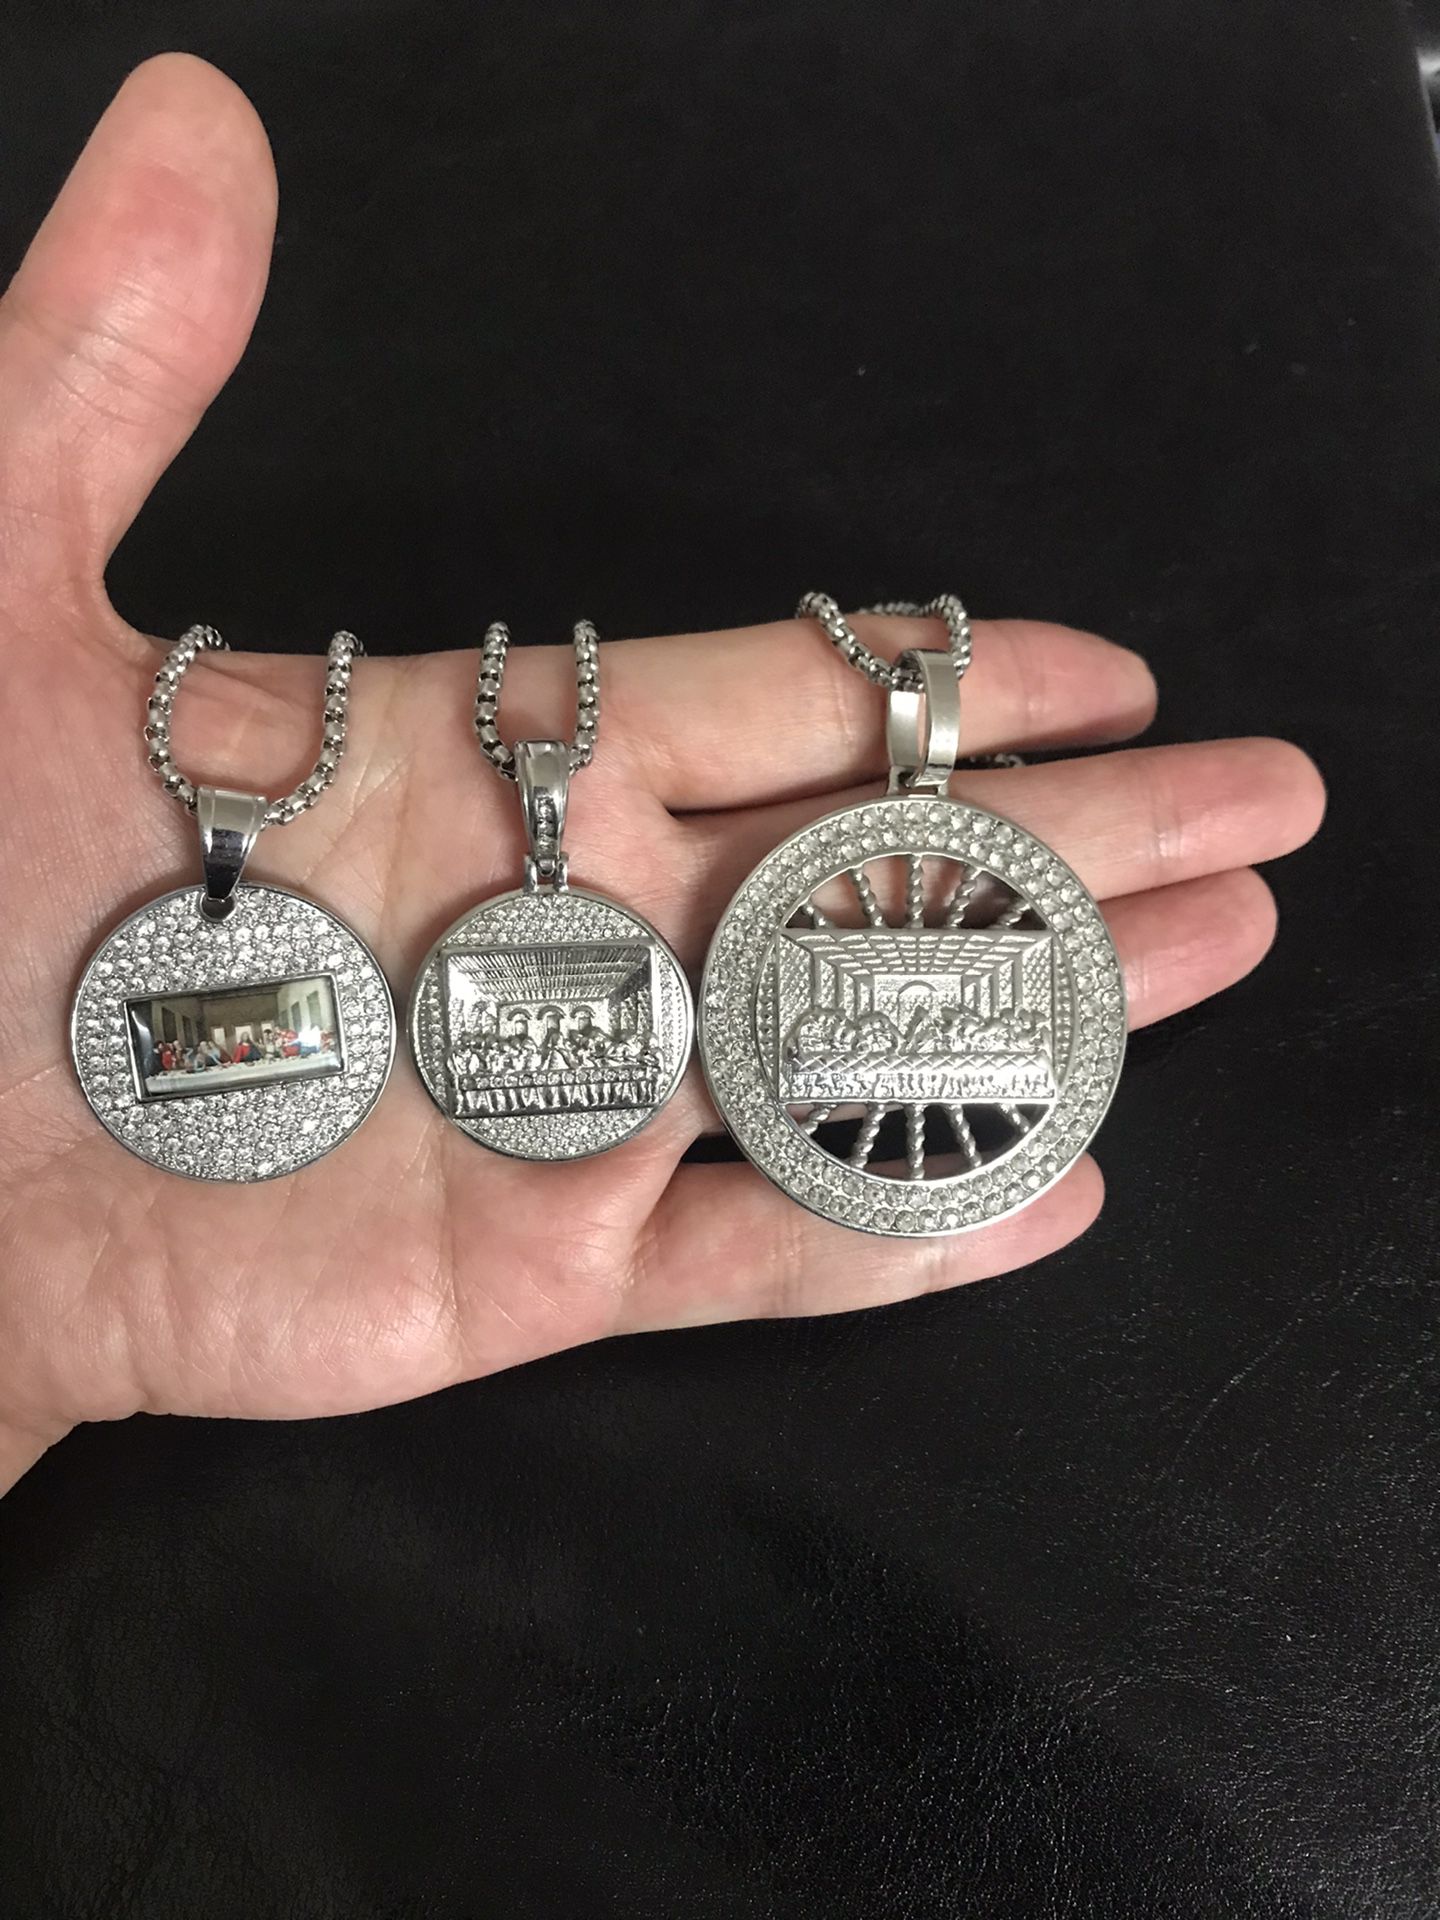 Stainless Steel Last Supper Pendant With Chain.($12 Each)